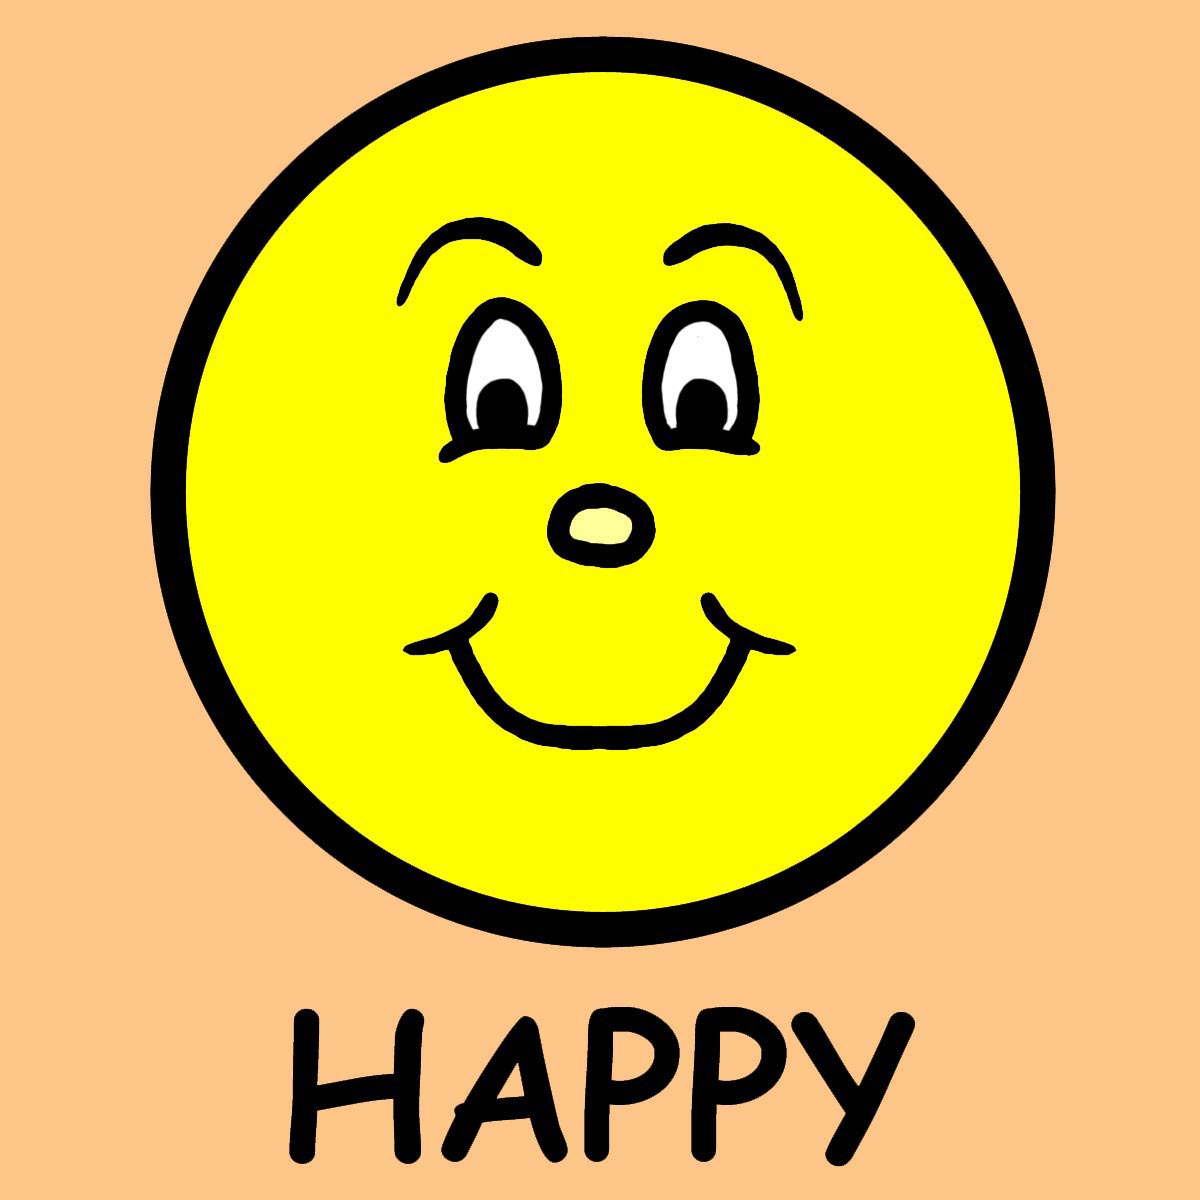 clipart of a happy person - photo #29